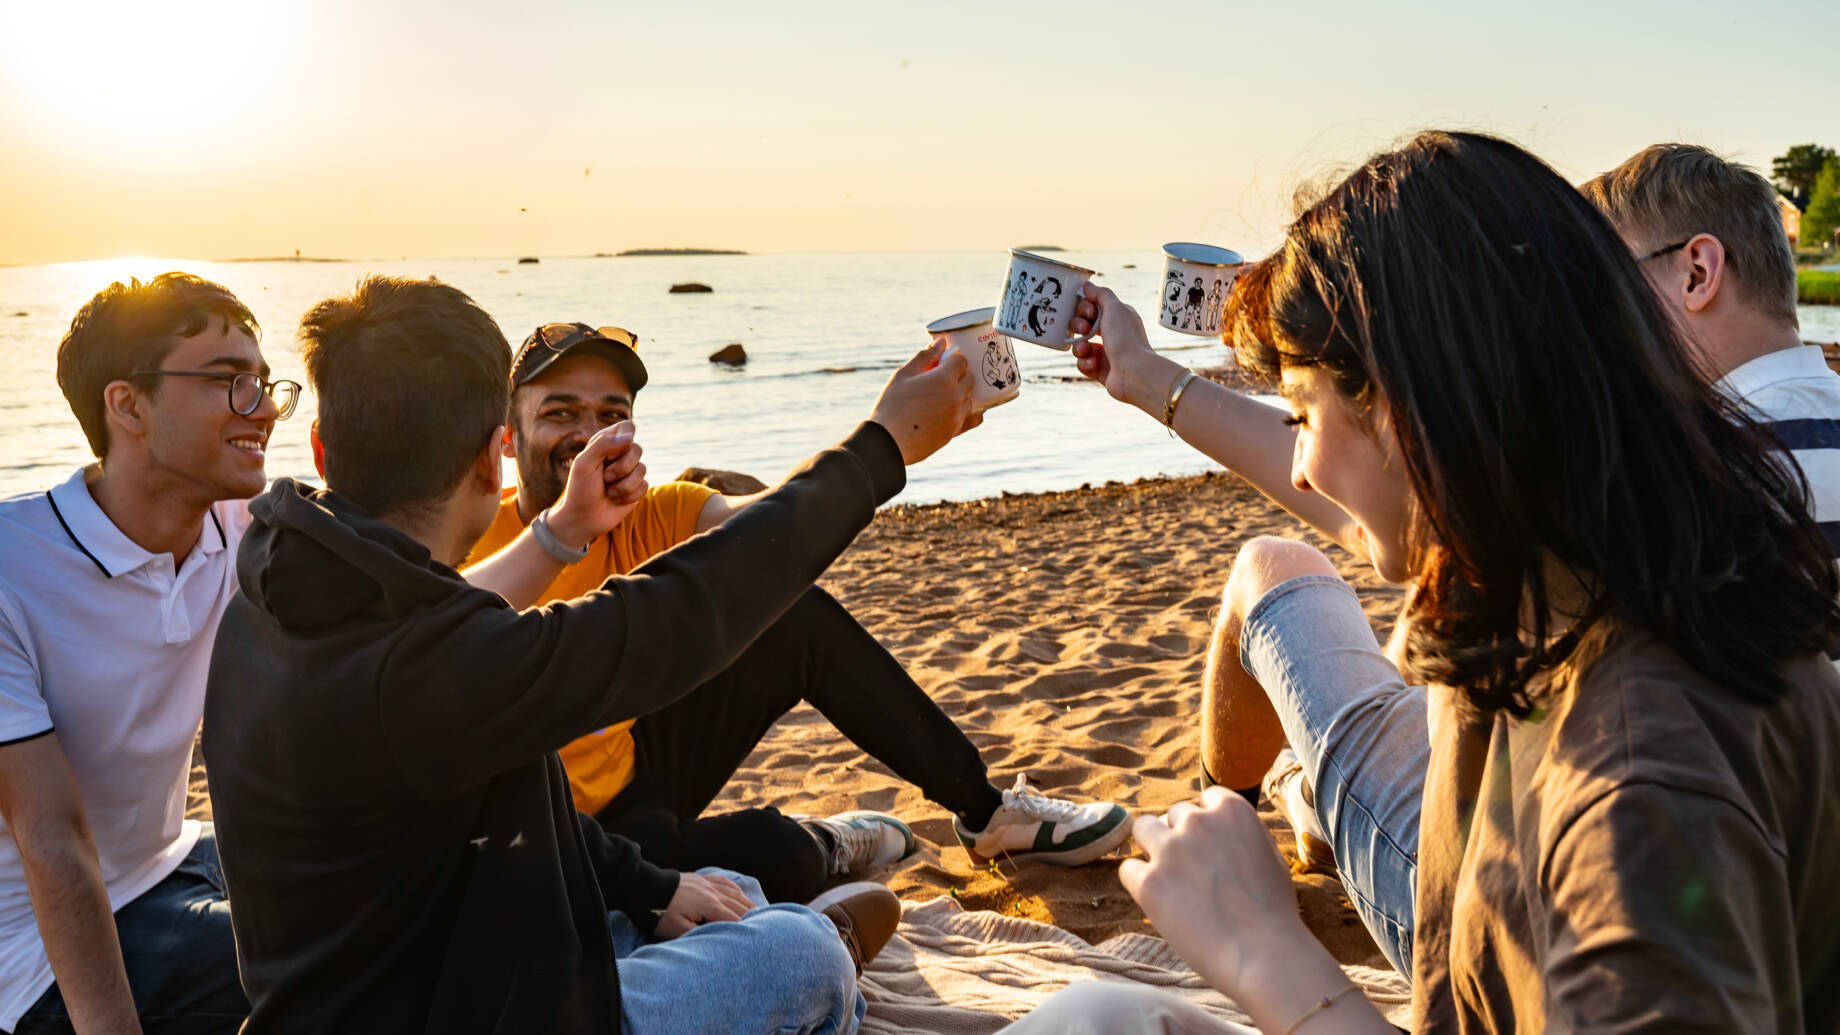 Students on a beach during a sunset in Kokkola